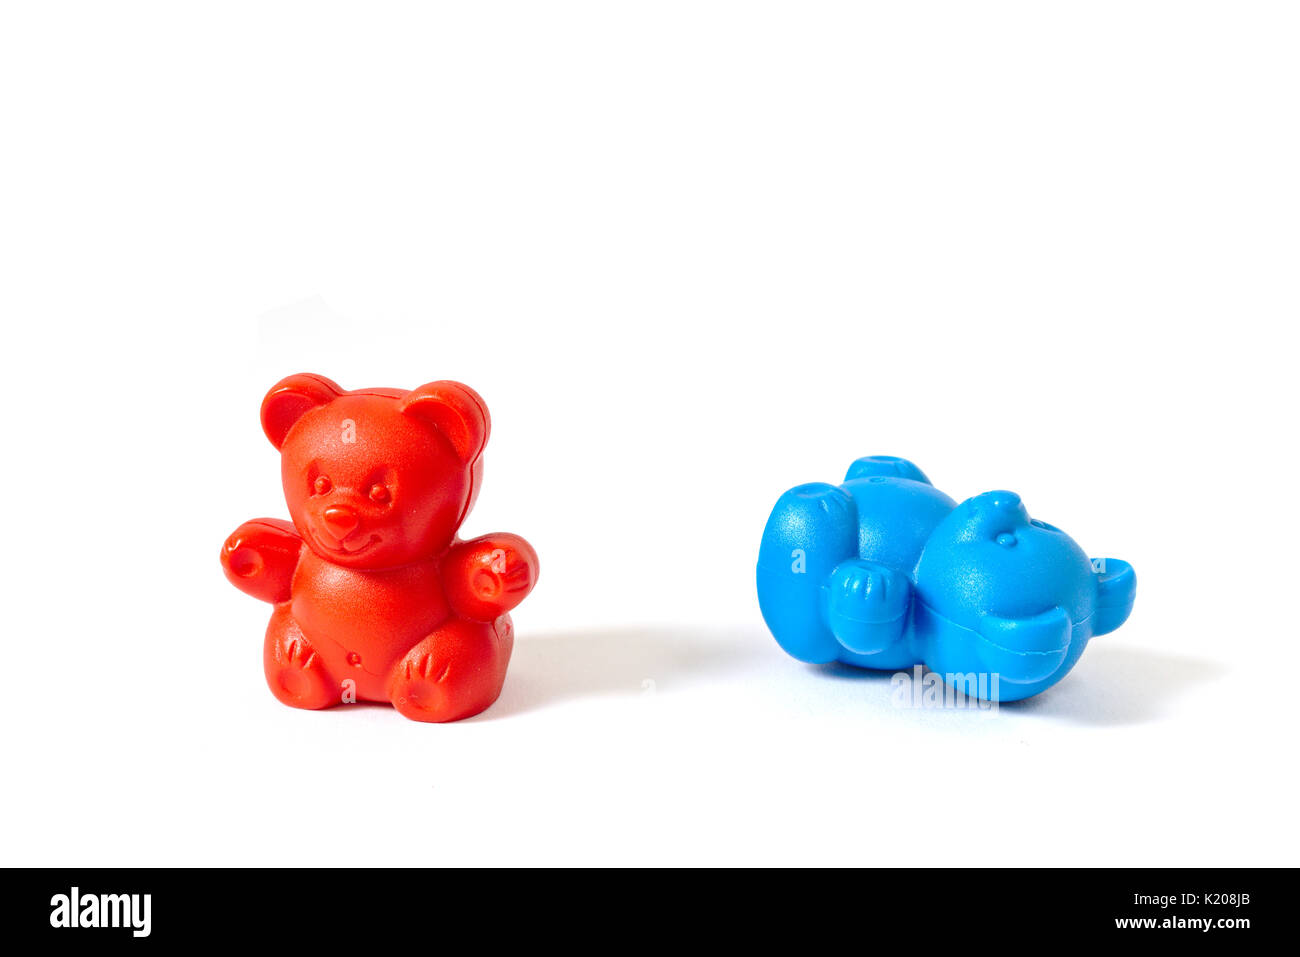 Plastic toy bears in the colors of the Democratic and Republican Party with the red bear standing and the blue bear knocked over Stock Photo